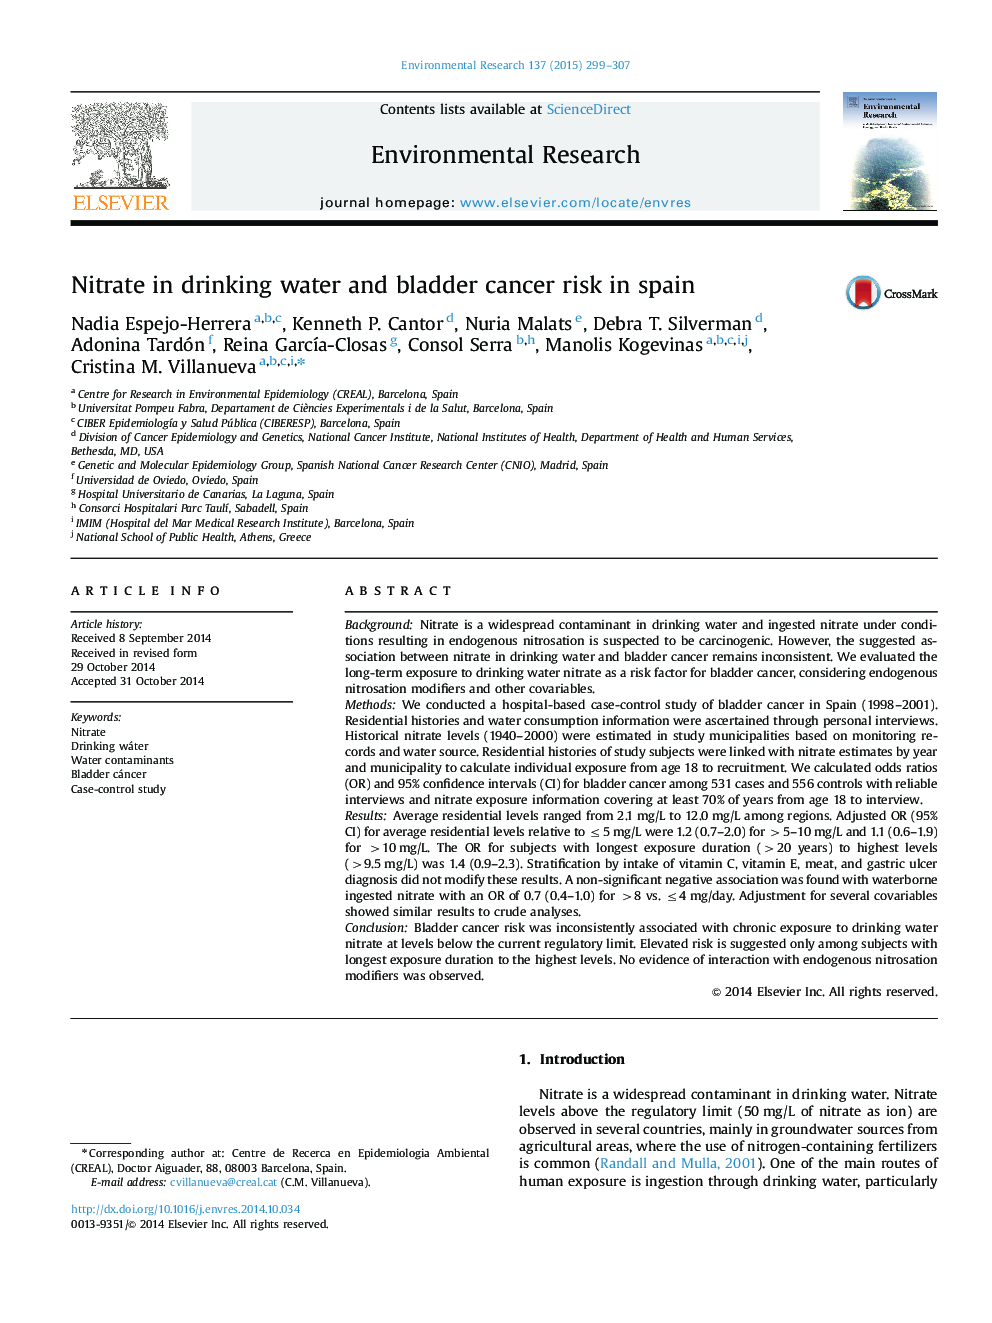 Nitrate in drinking water and bladder cancer risk in Spain